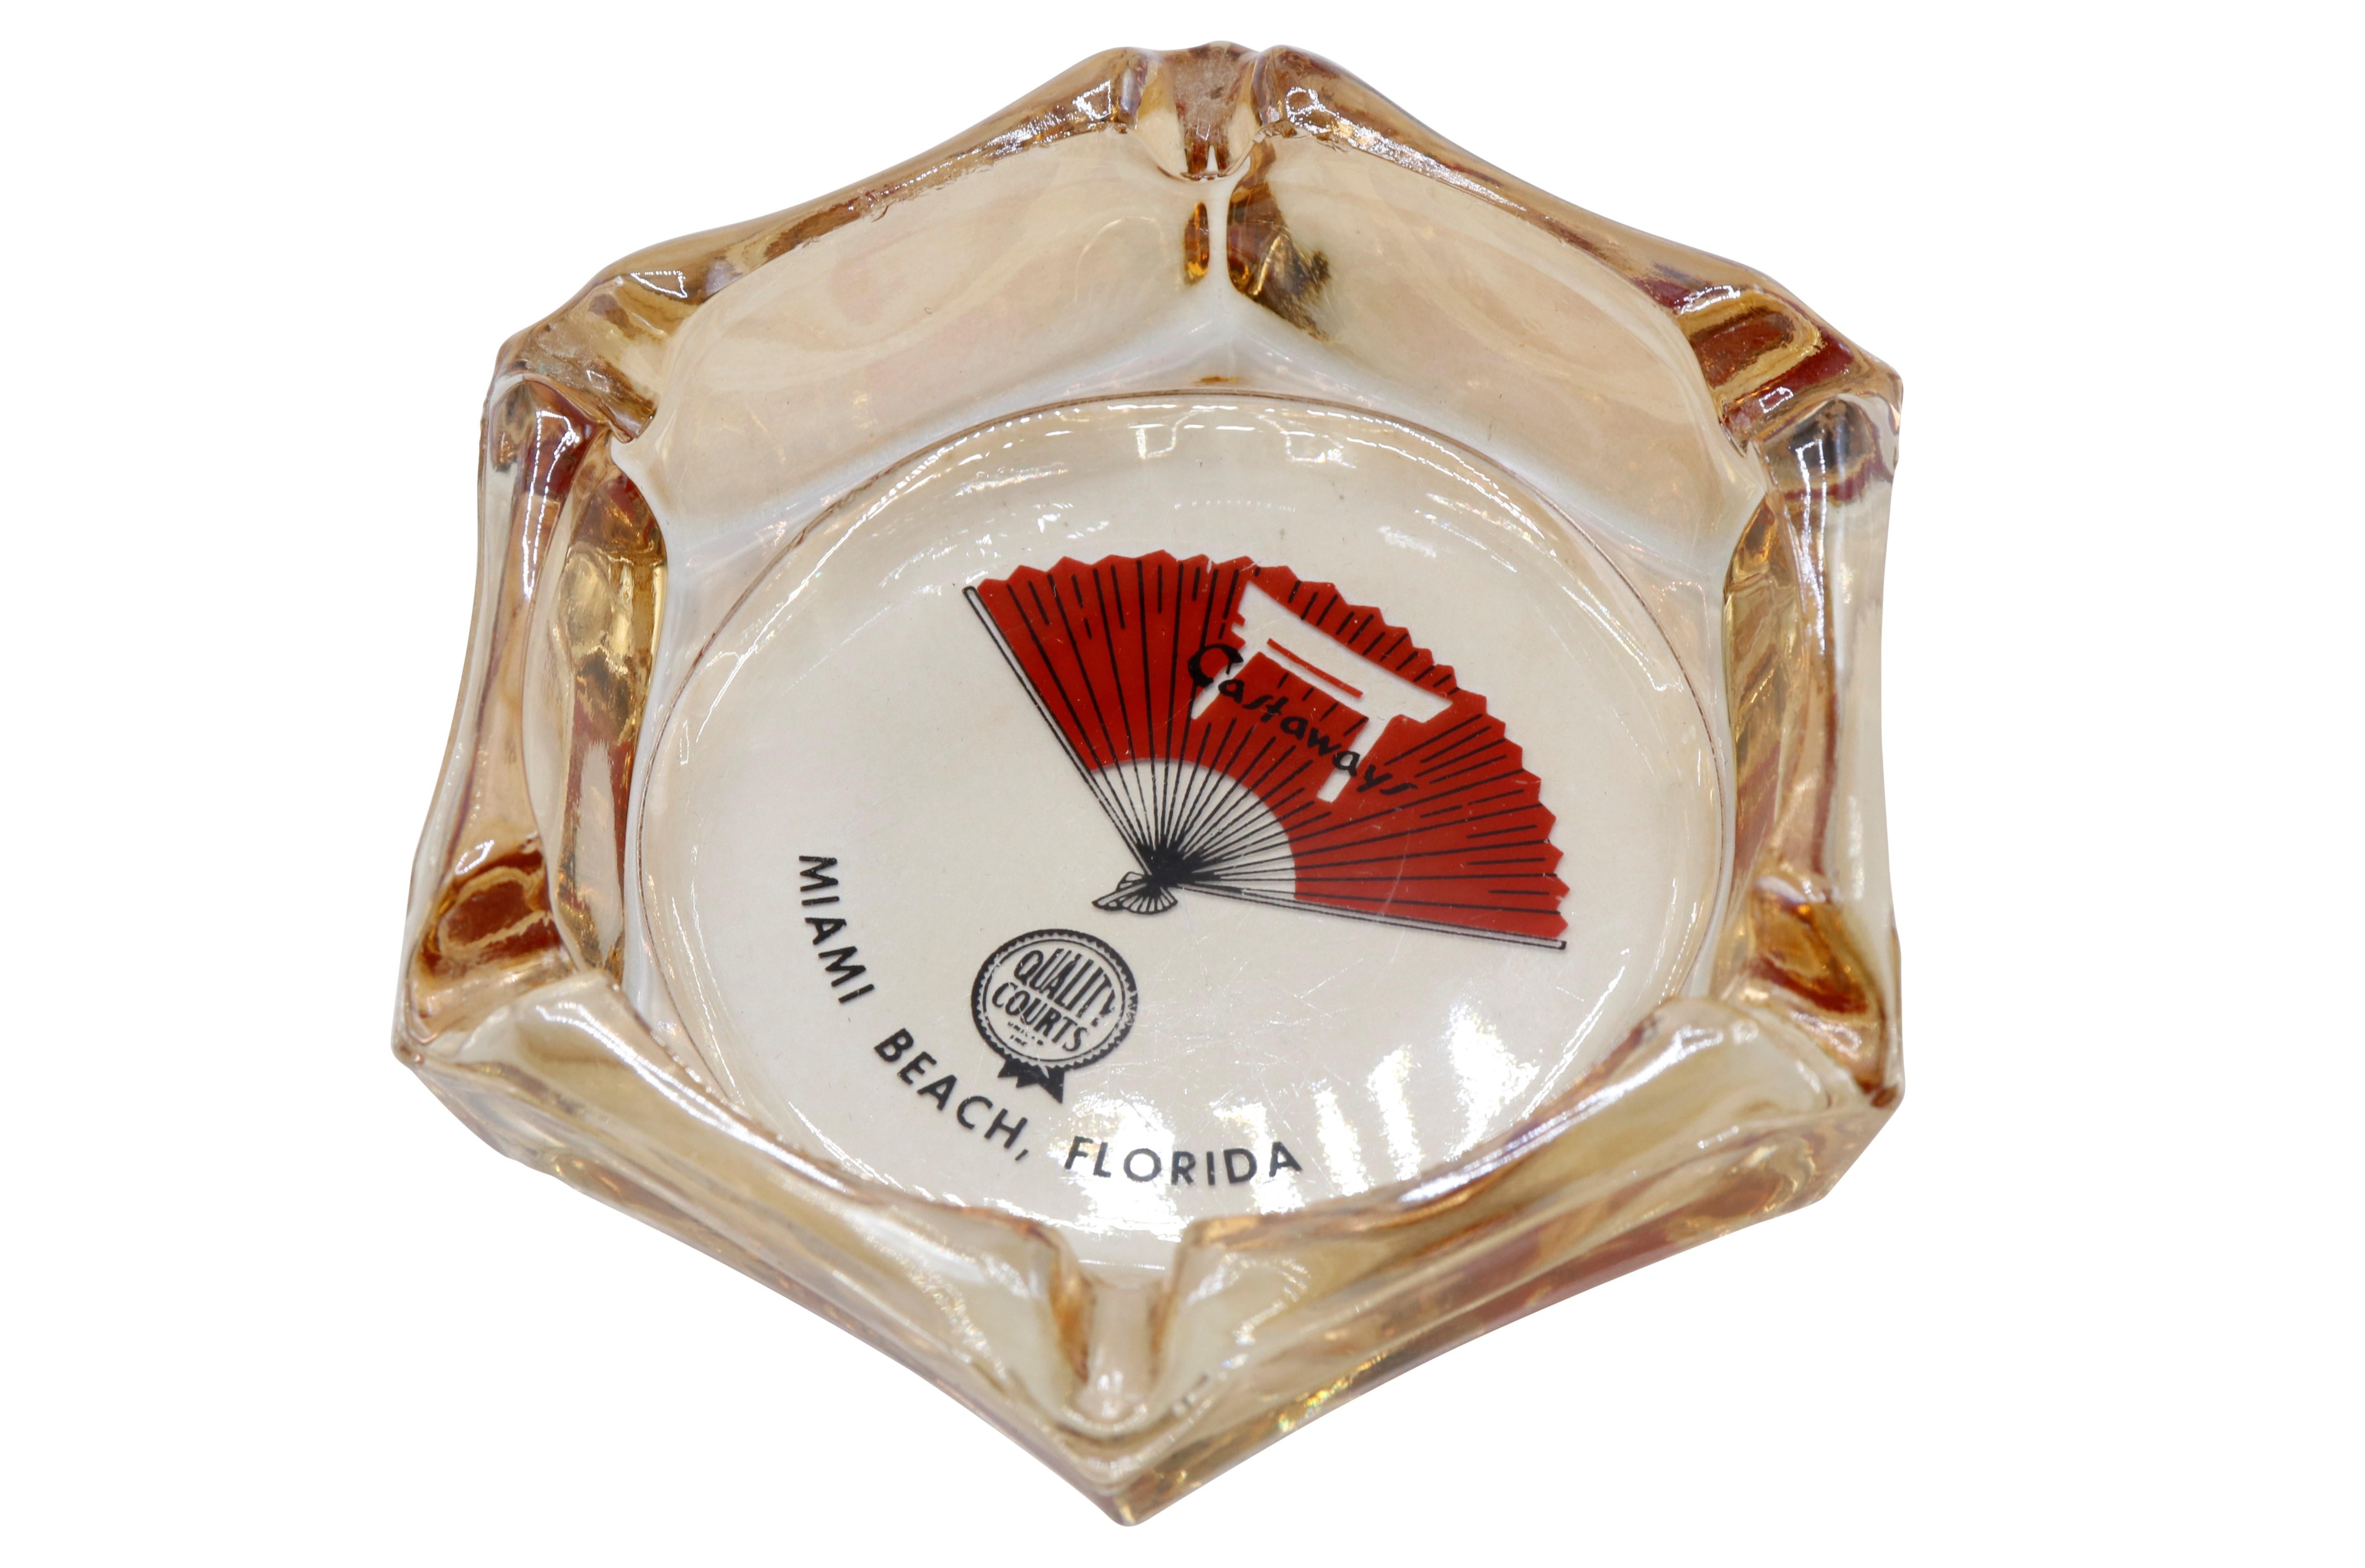 An hexagonal glass ashtray from The Castaways Hotel of Miami Beach, Florida. The center is printed with their logo and reads “Castaways, Quality Courts, Miami Beach Florida”.
